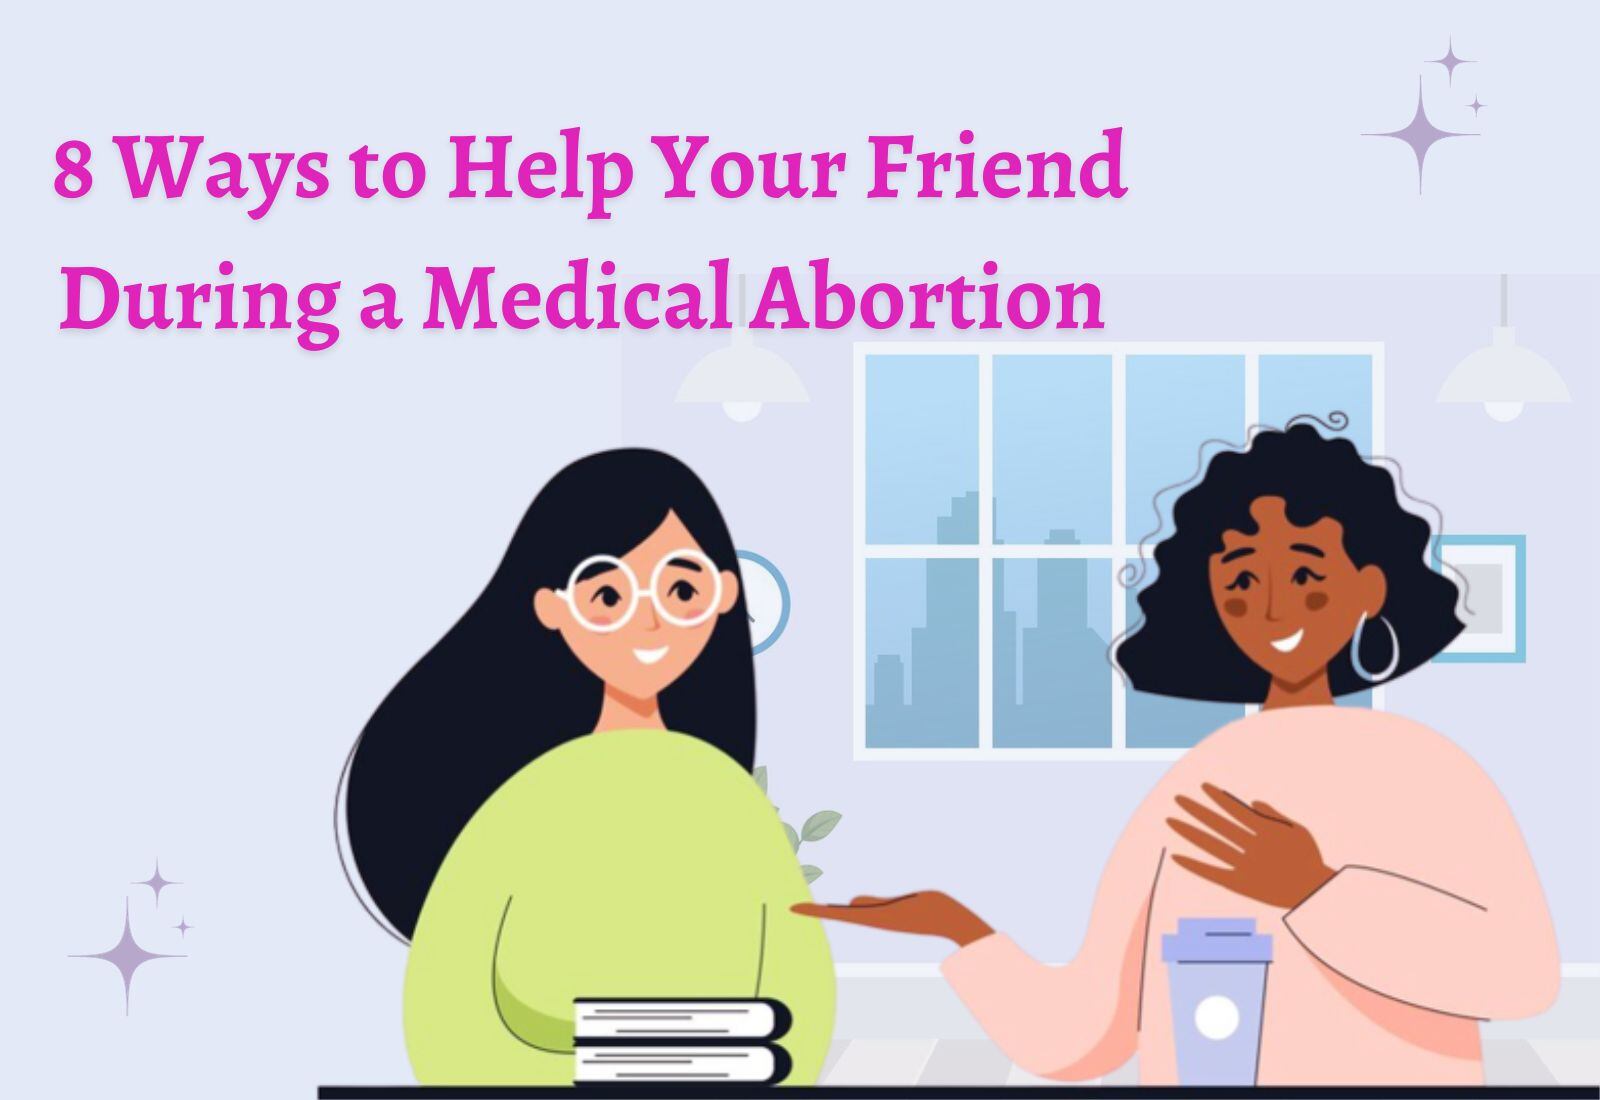 8 Ways to Help Your Friend During a Medical Abortion